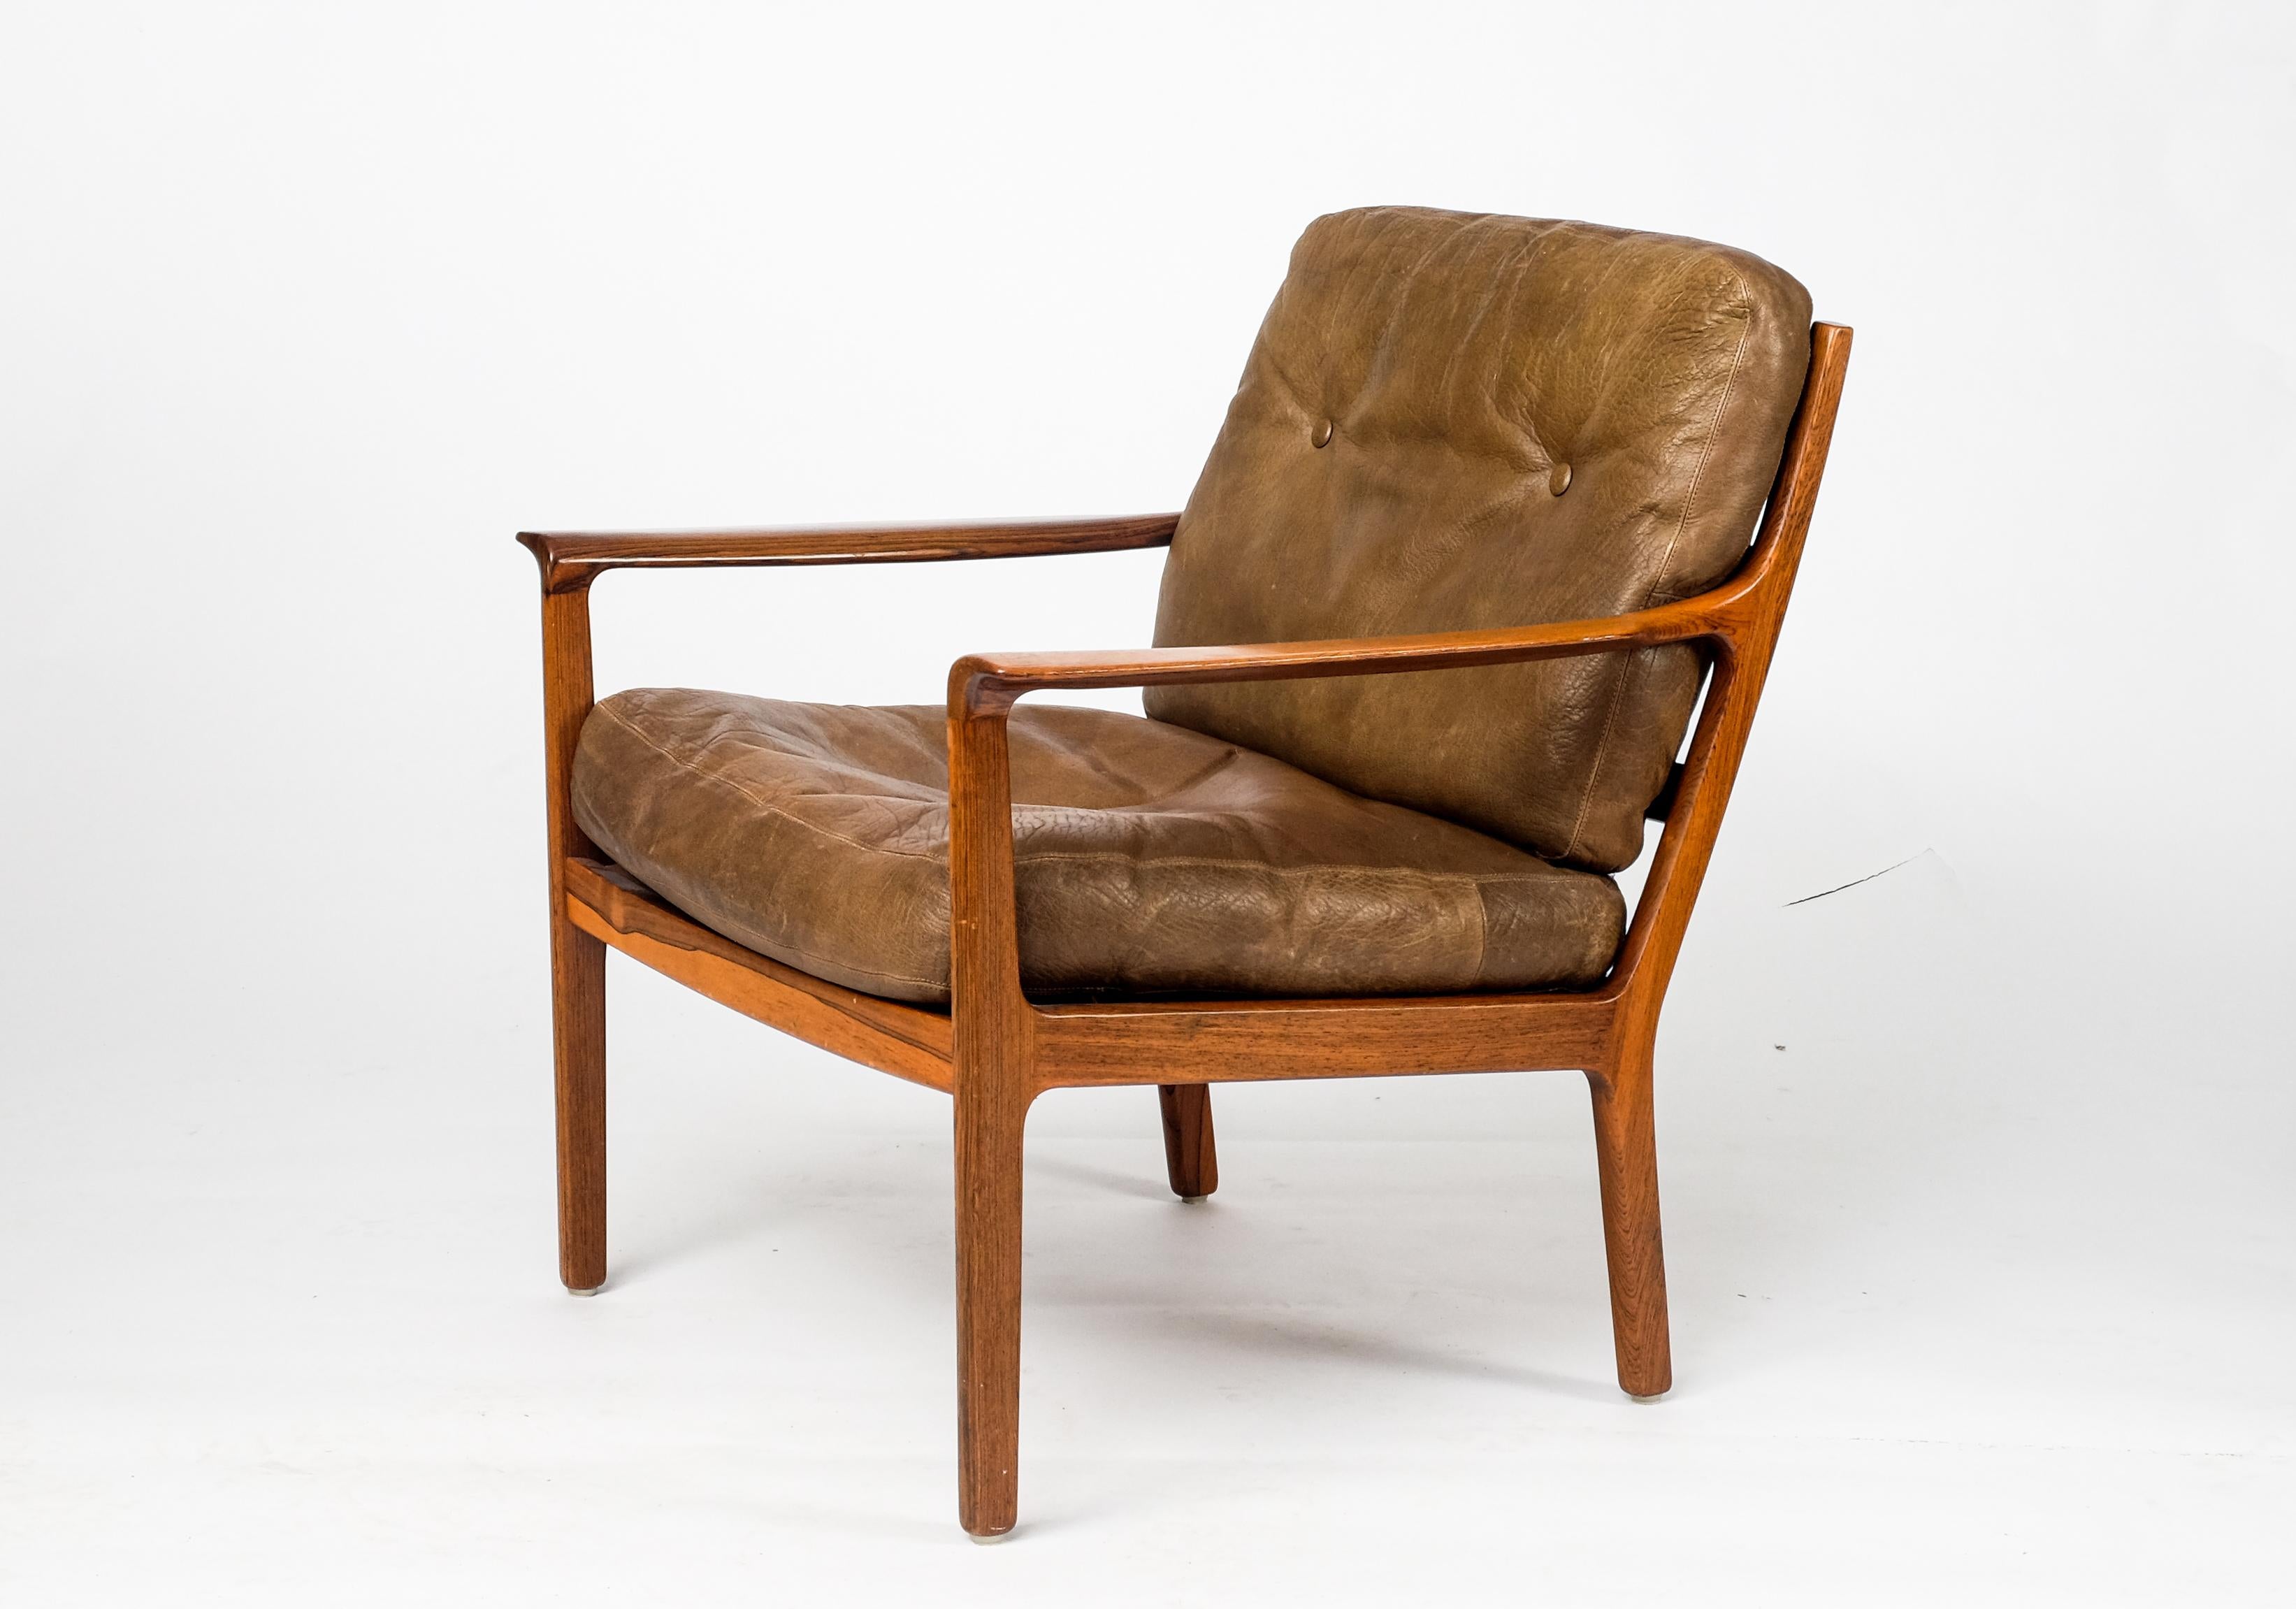 Easy chair produced in Norway by Vatne Møbler, design Fredrik Kayser.
Original leather cushions. Very good vintage condition.